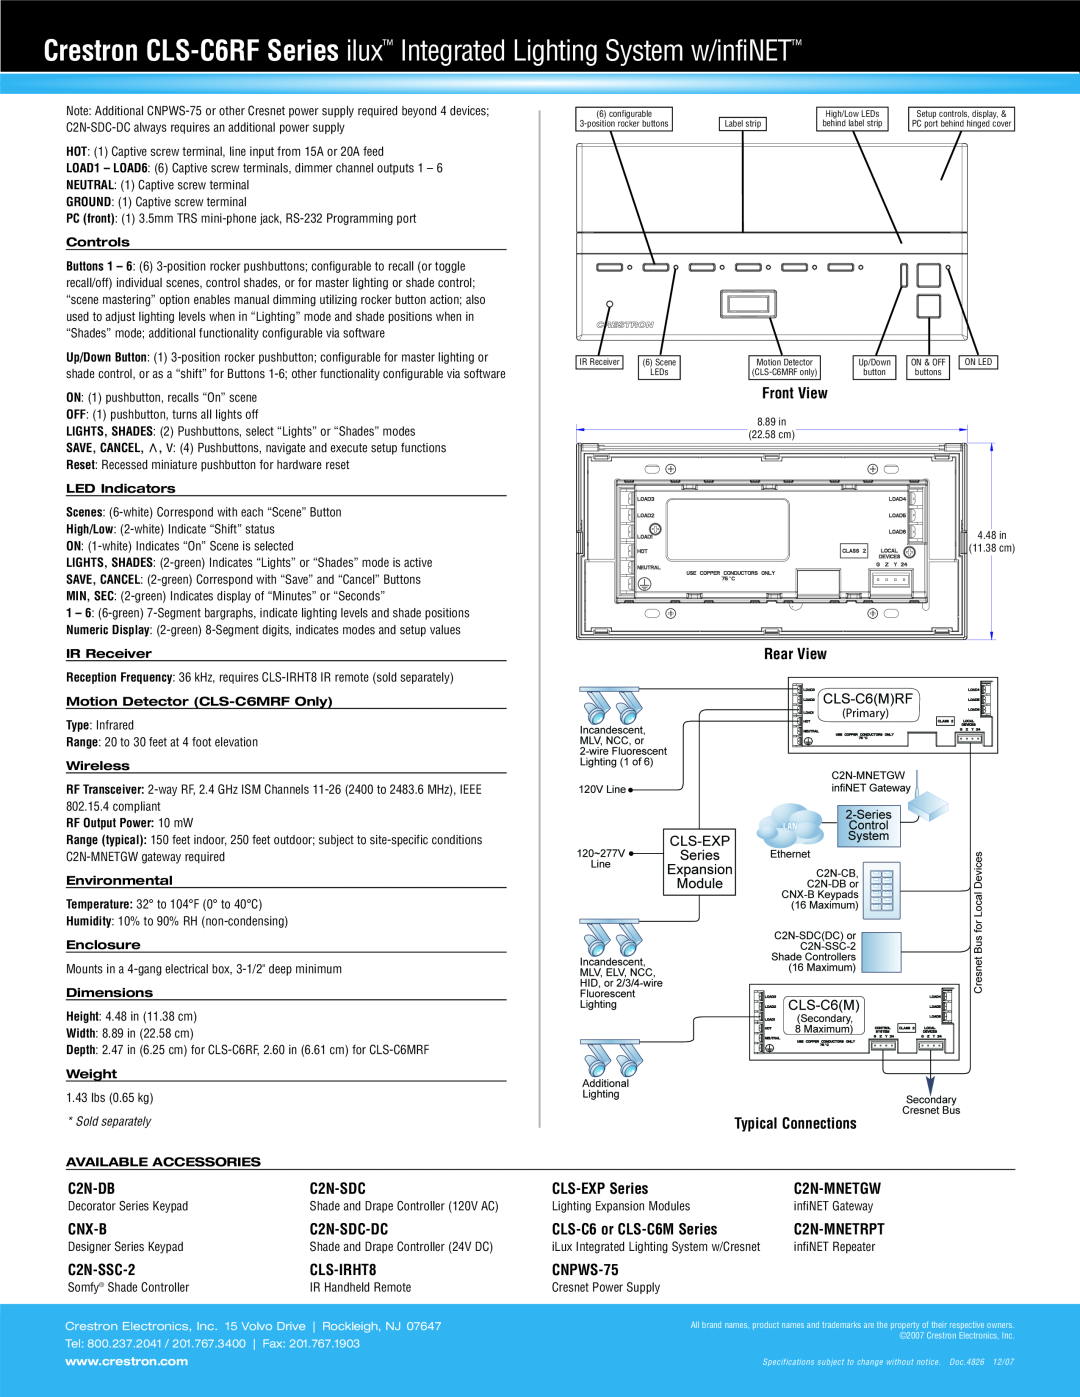 Crestron electronic CLS-C6RF Series specifications Front View 